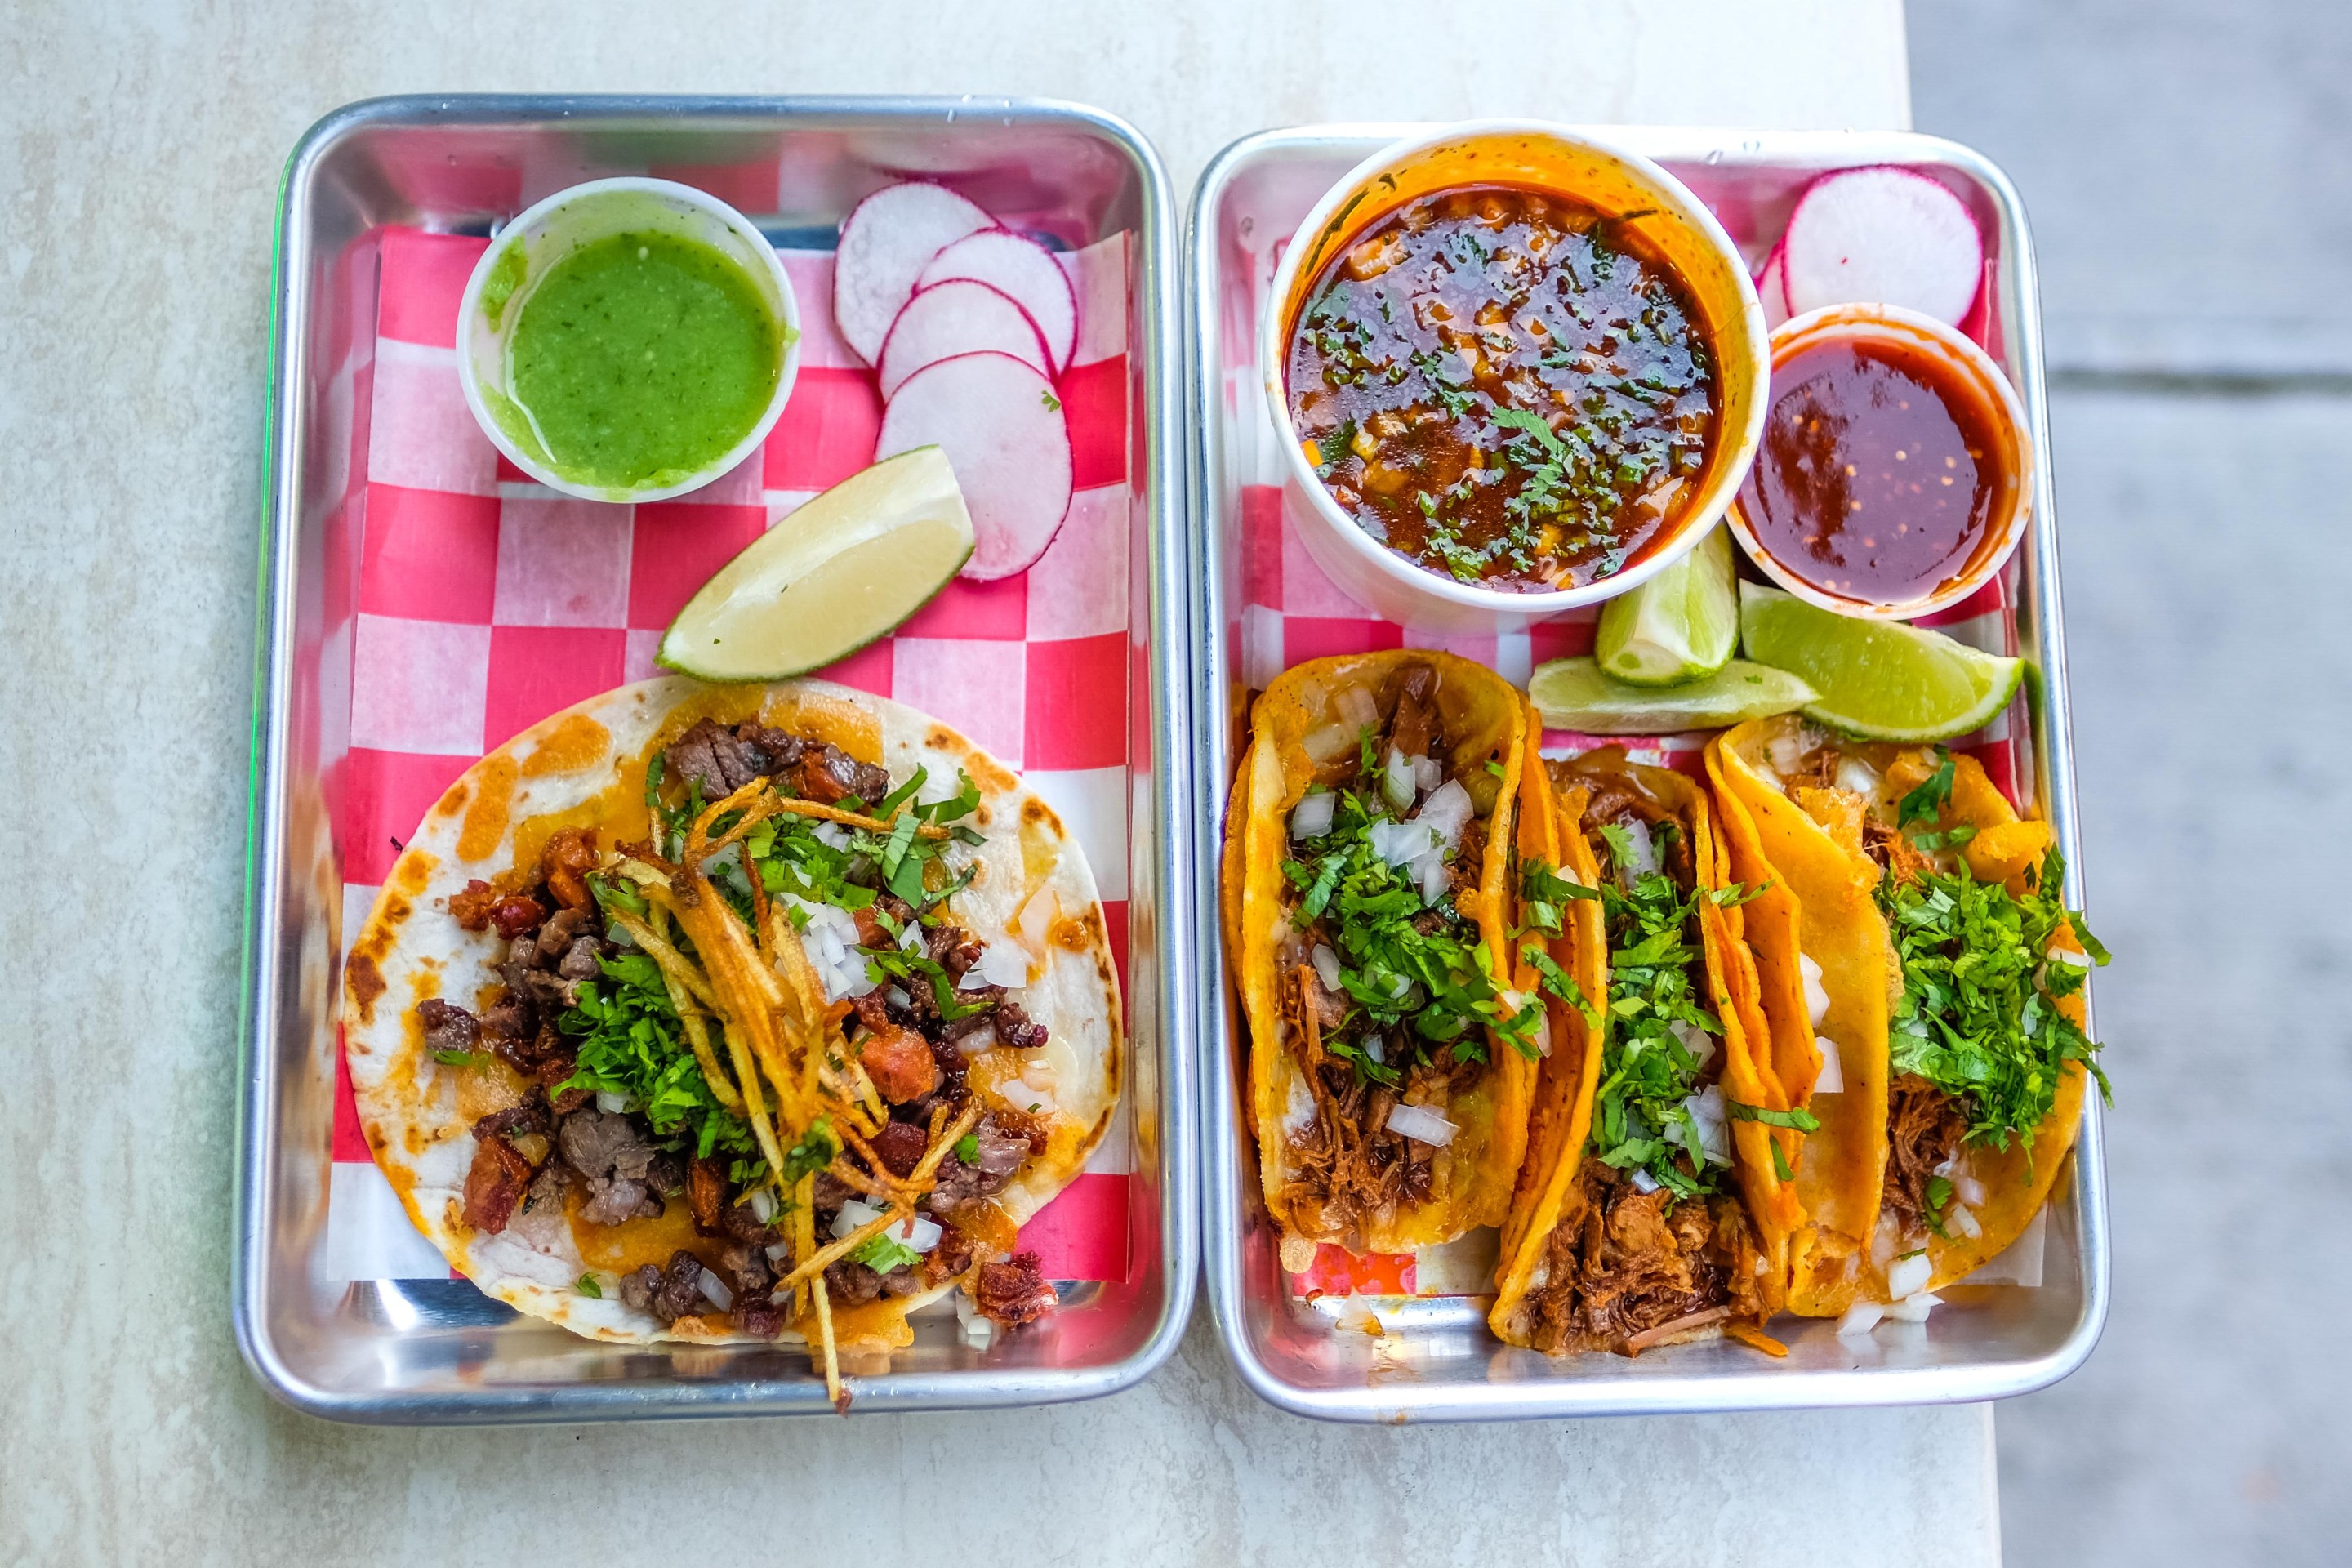 Delicious birria tacos in little steel trays.